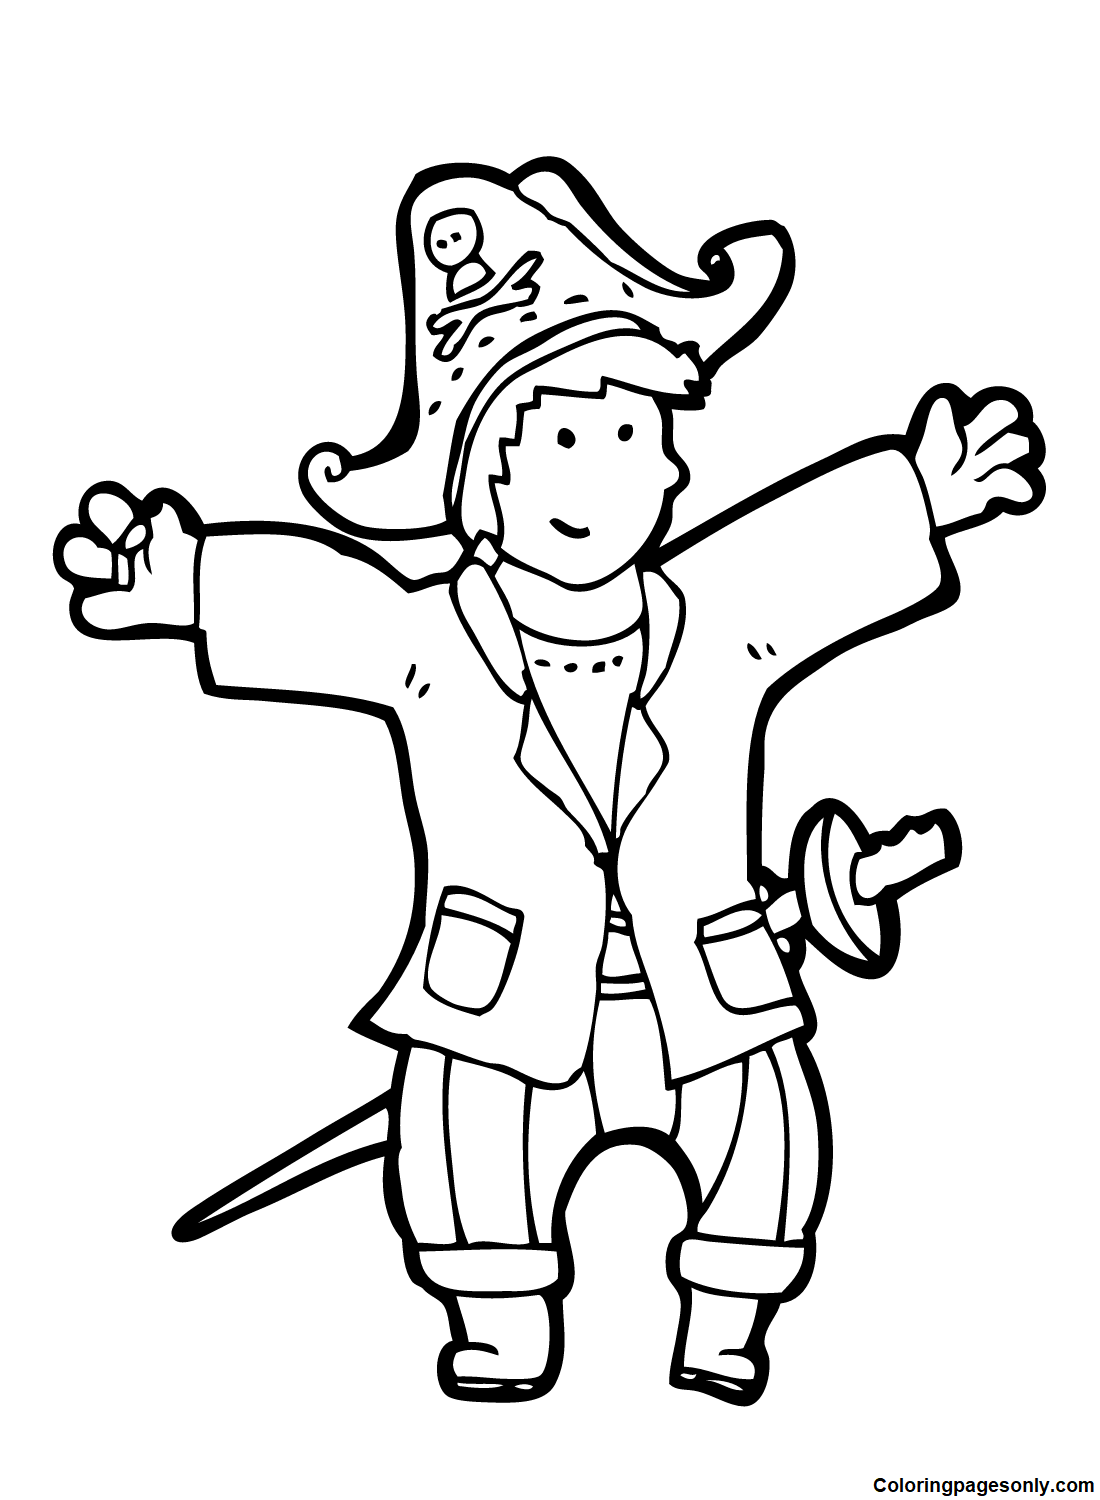 Dancing Pirate Boy Coloring Page